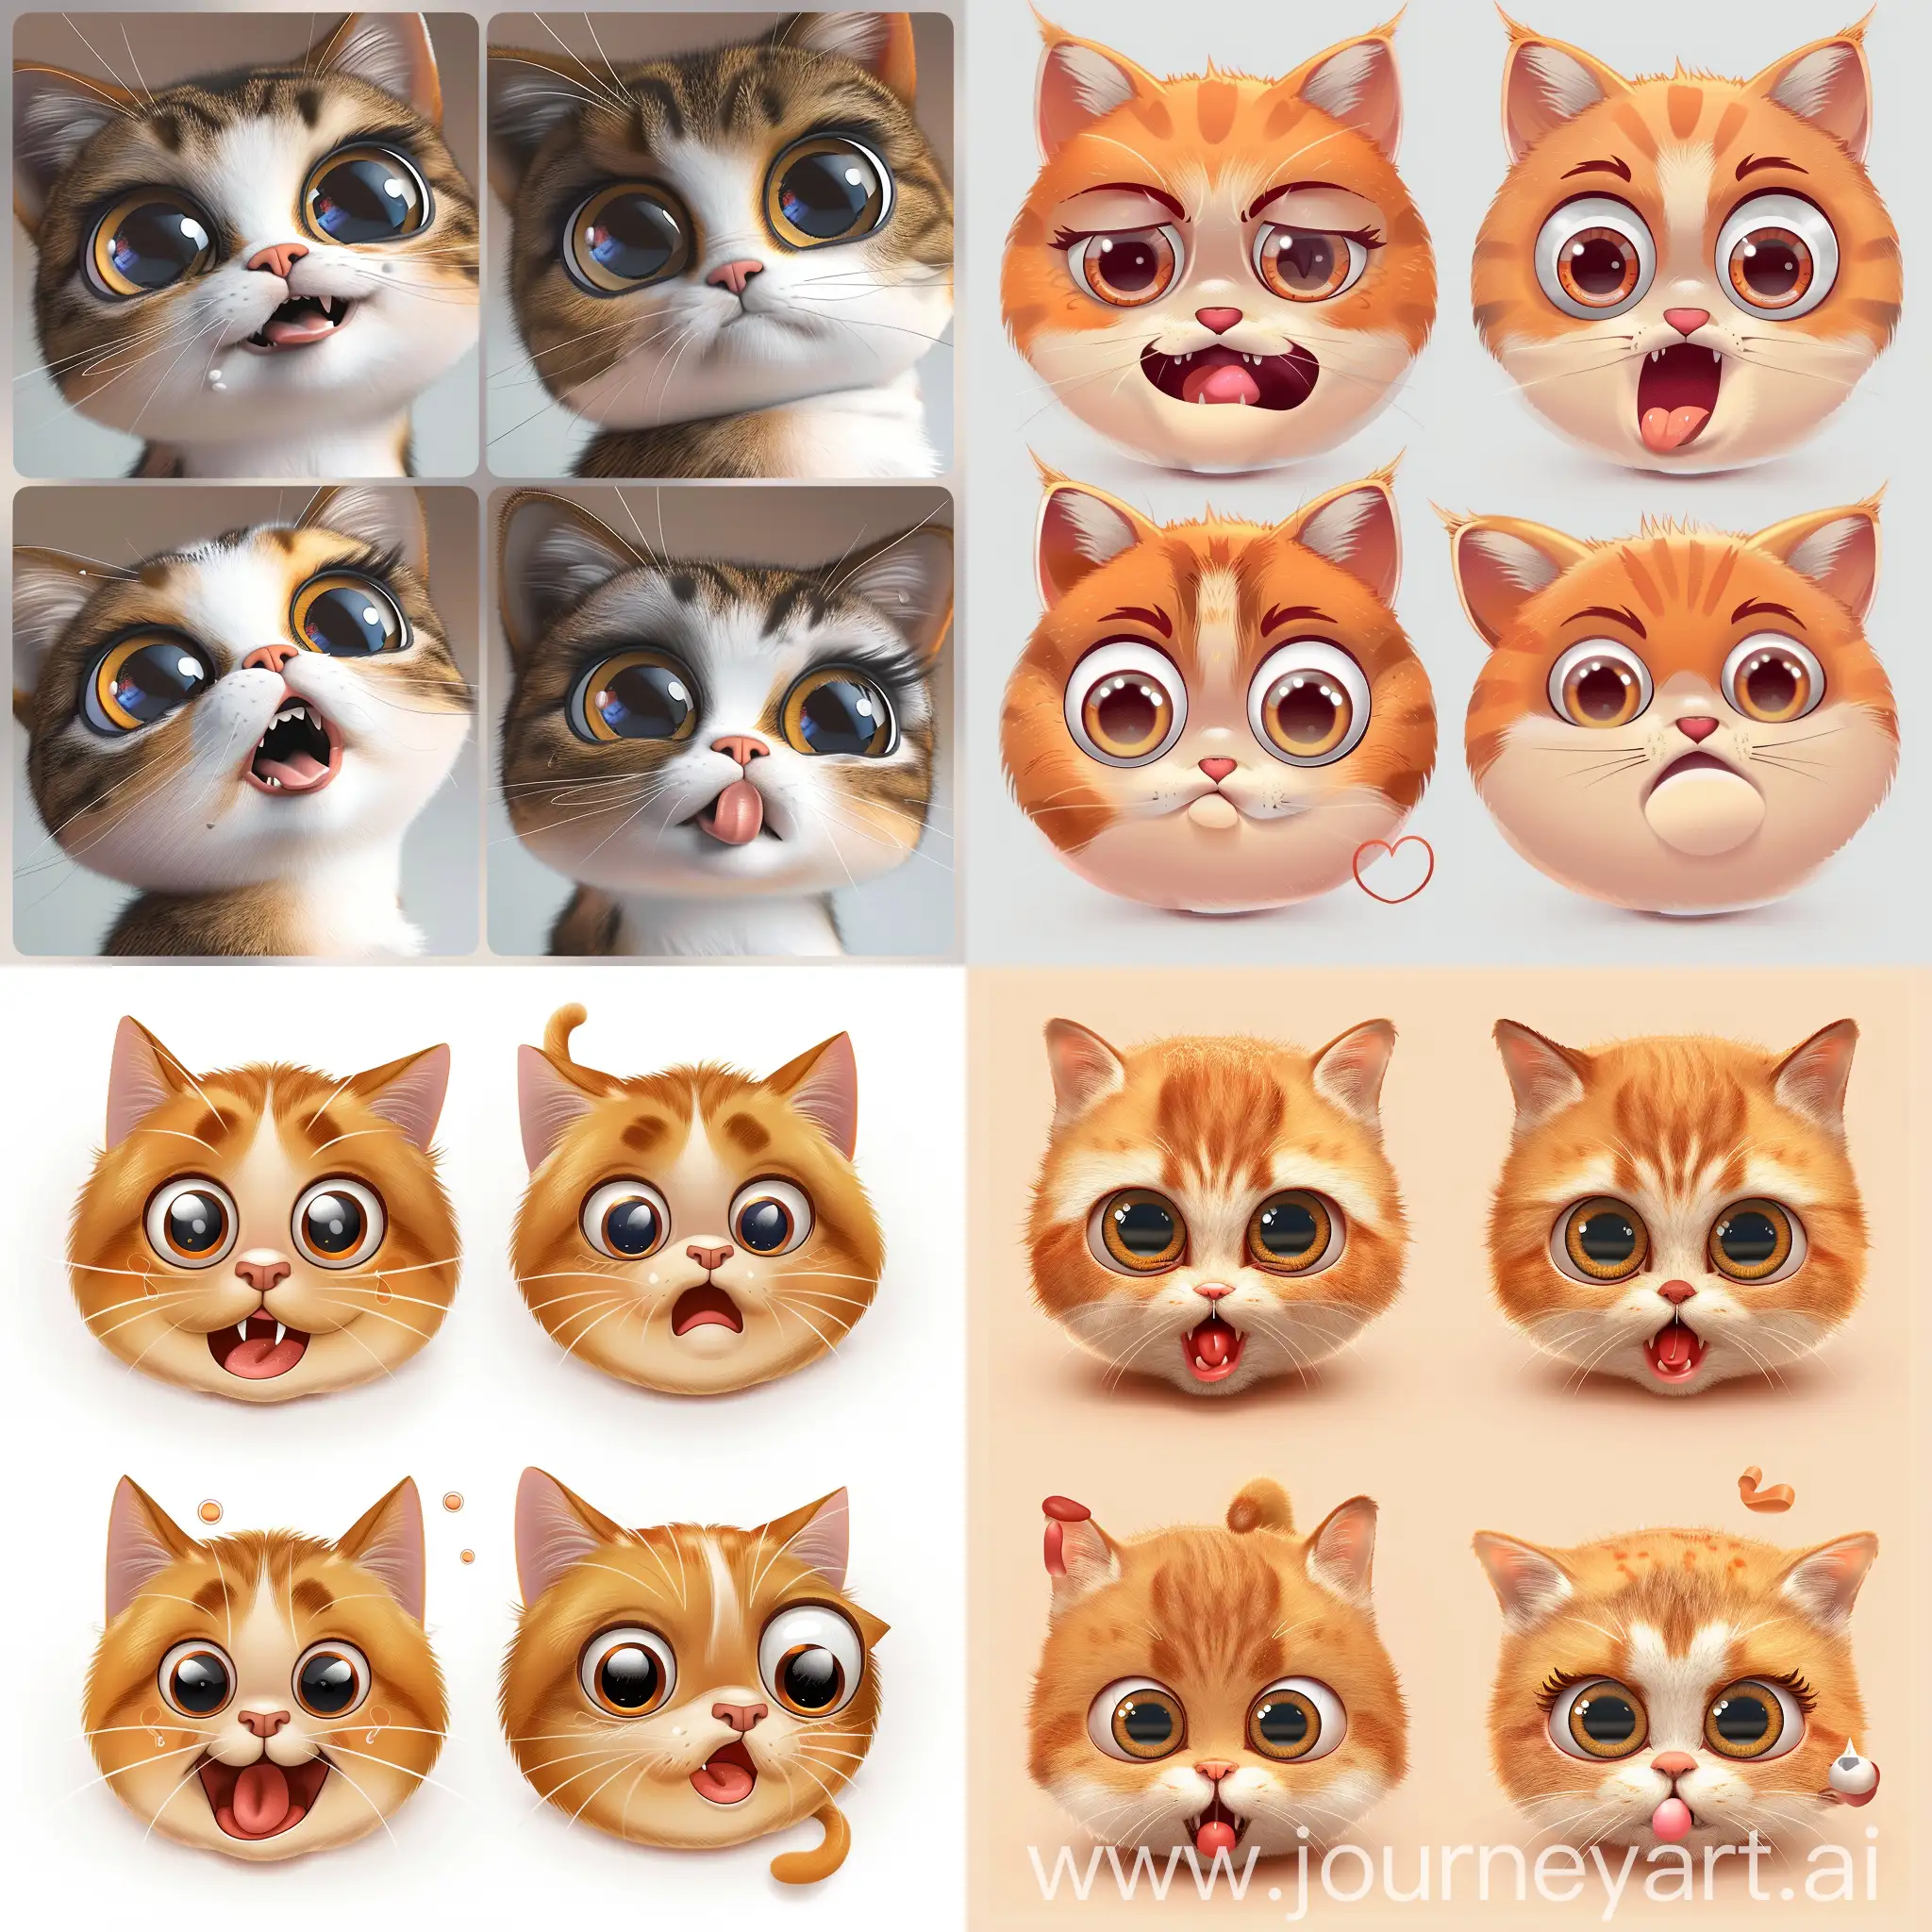 Playful-Cat-Emoji-Pack-Expressions-of-Innocence-Playfulness-and-Joy